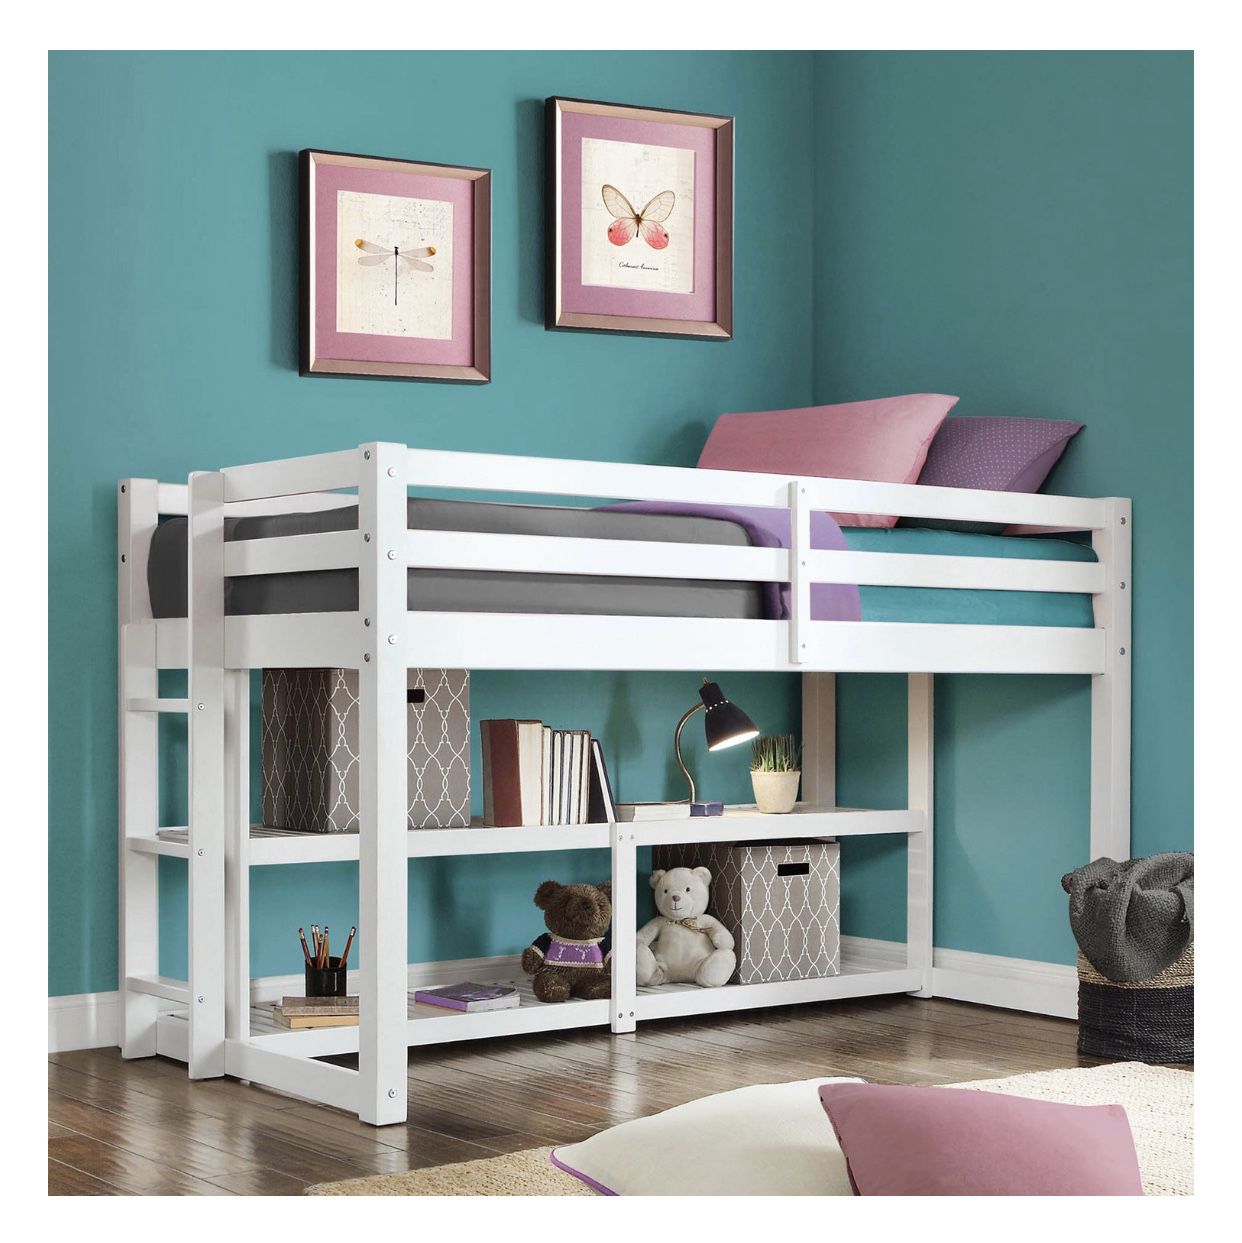 Better Homes and Gardens Greer Twin Loft Storage Bed with Spacious Storage Shelves, White Finishe